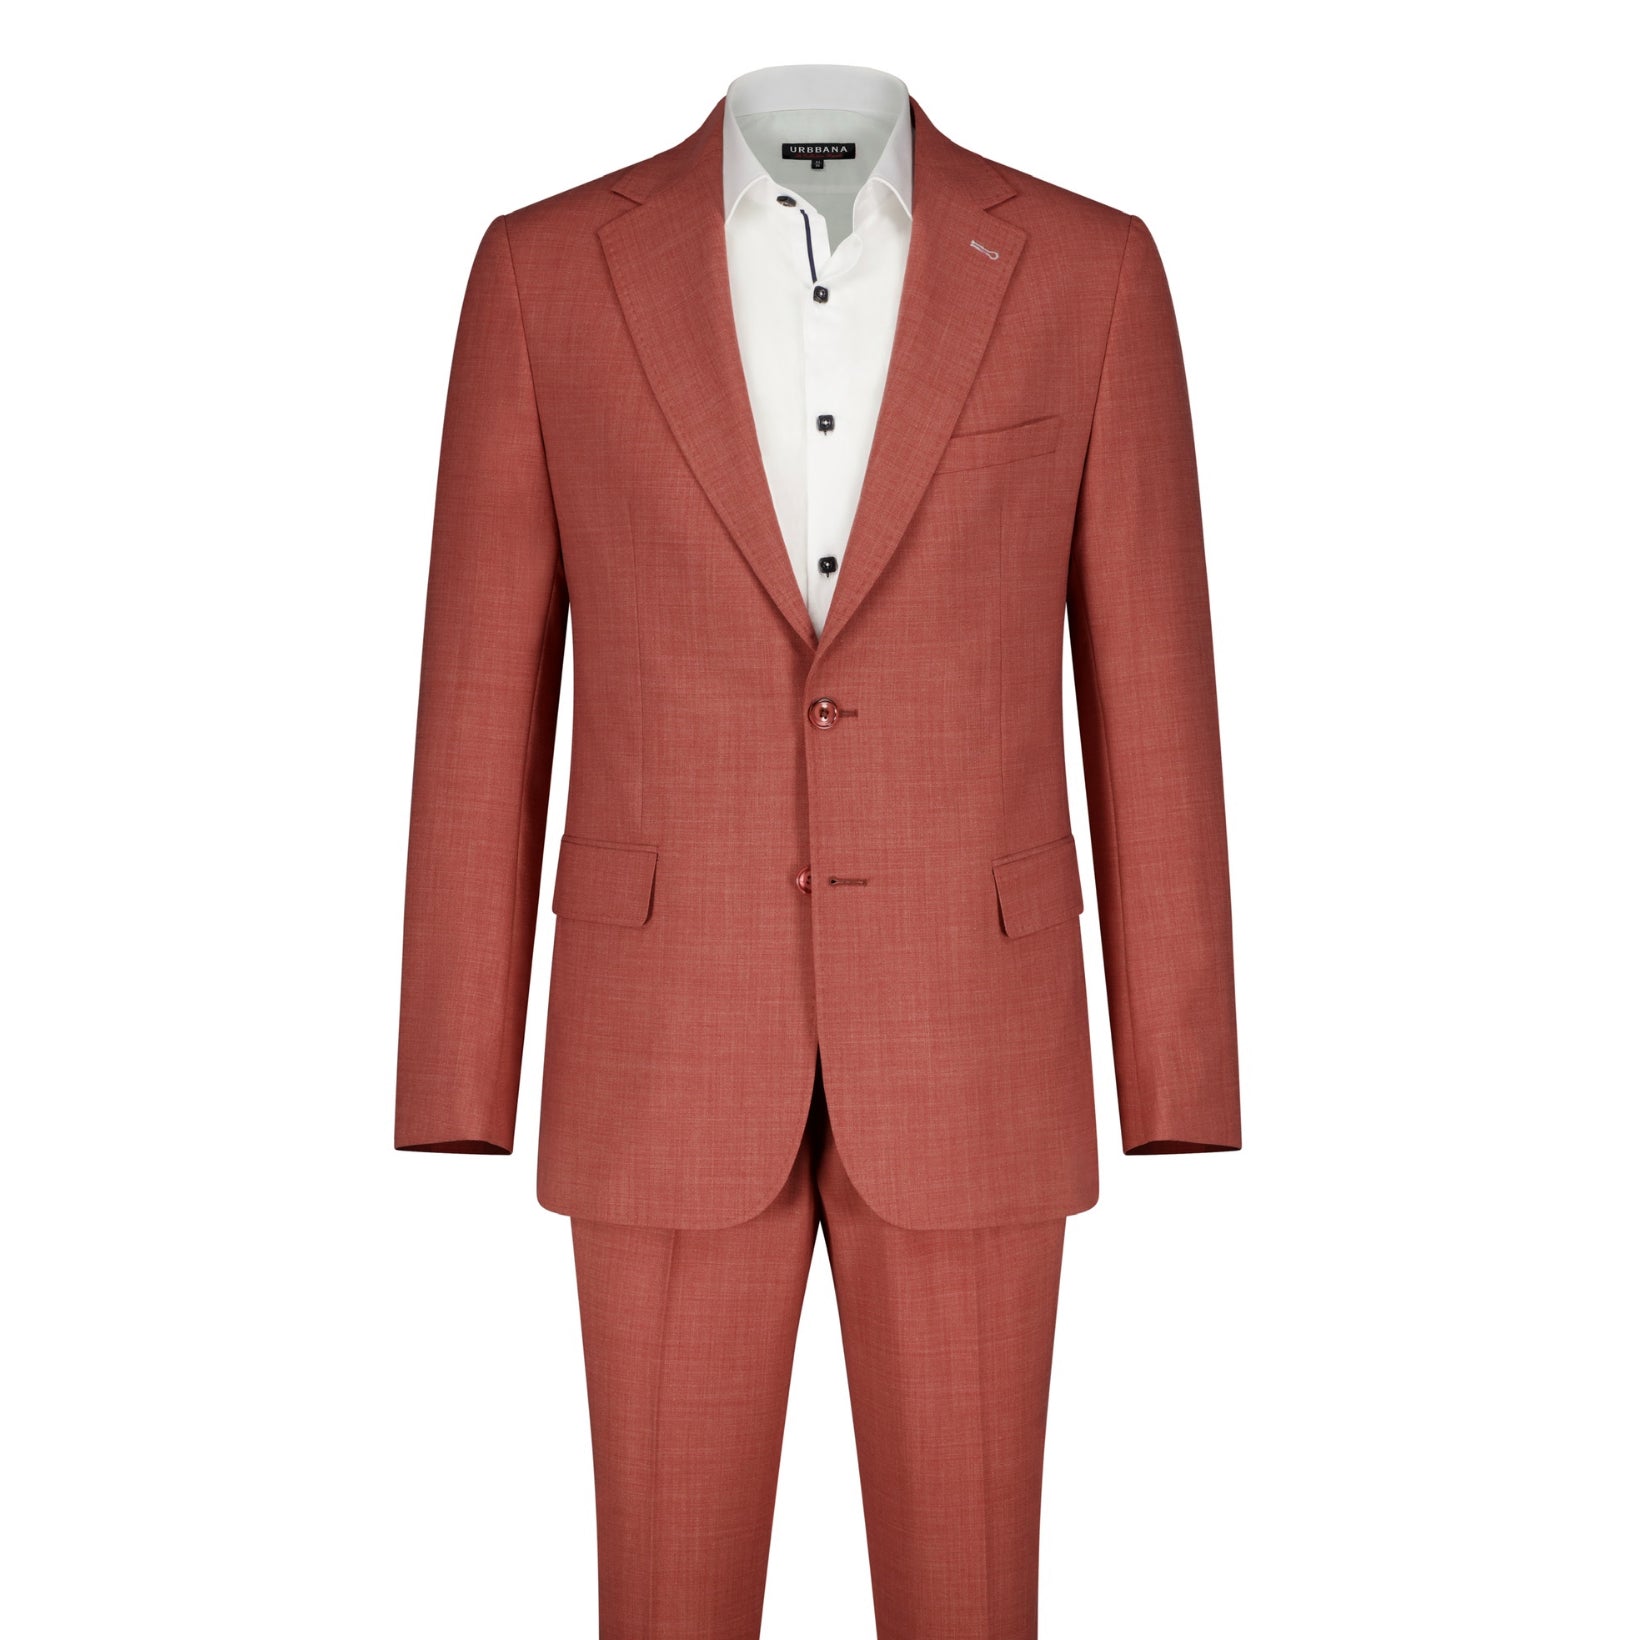 The Coral Suit - Suit by Urbbana